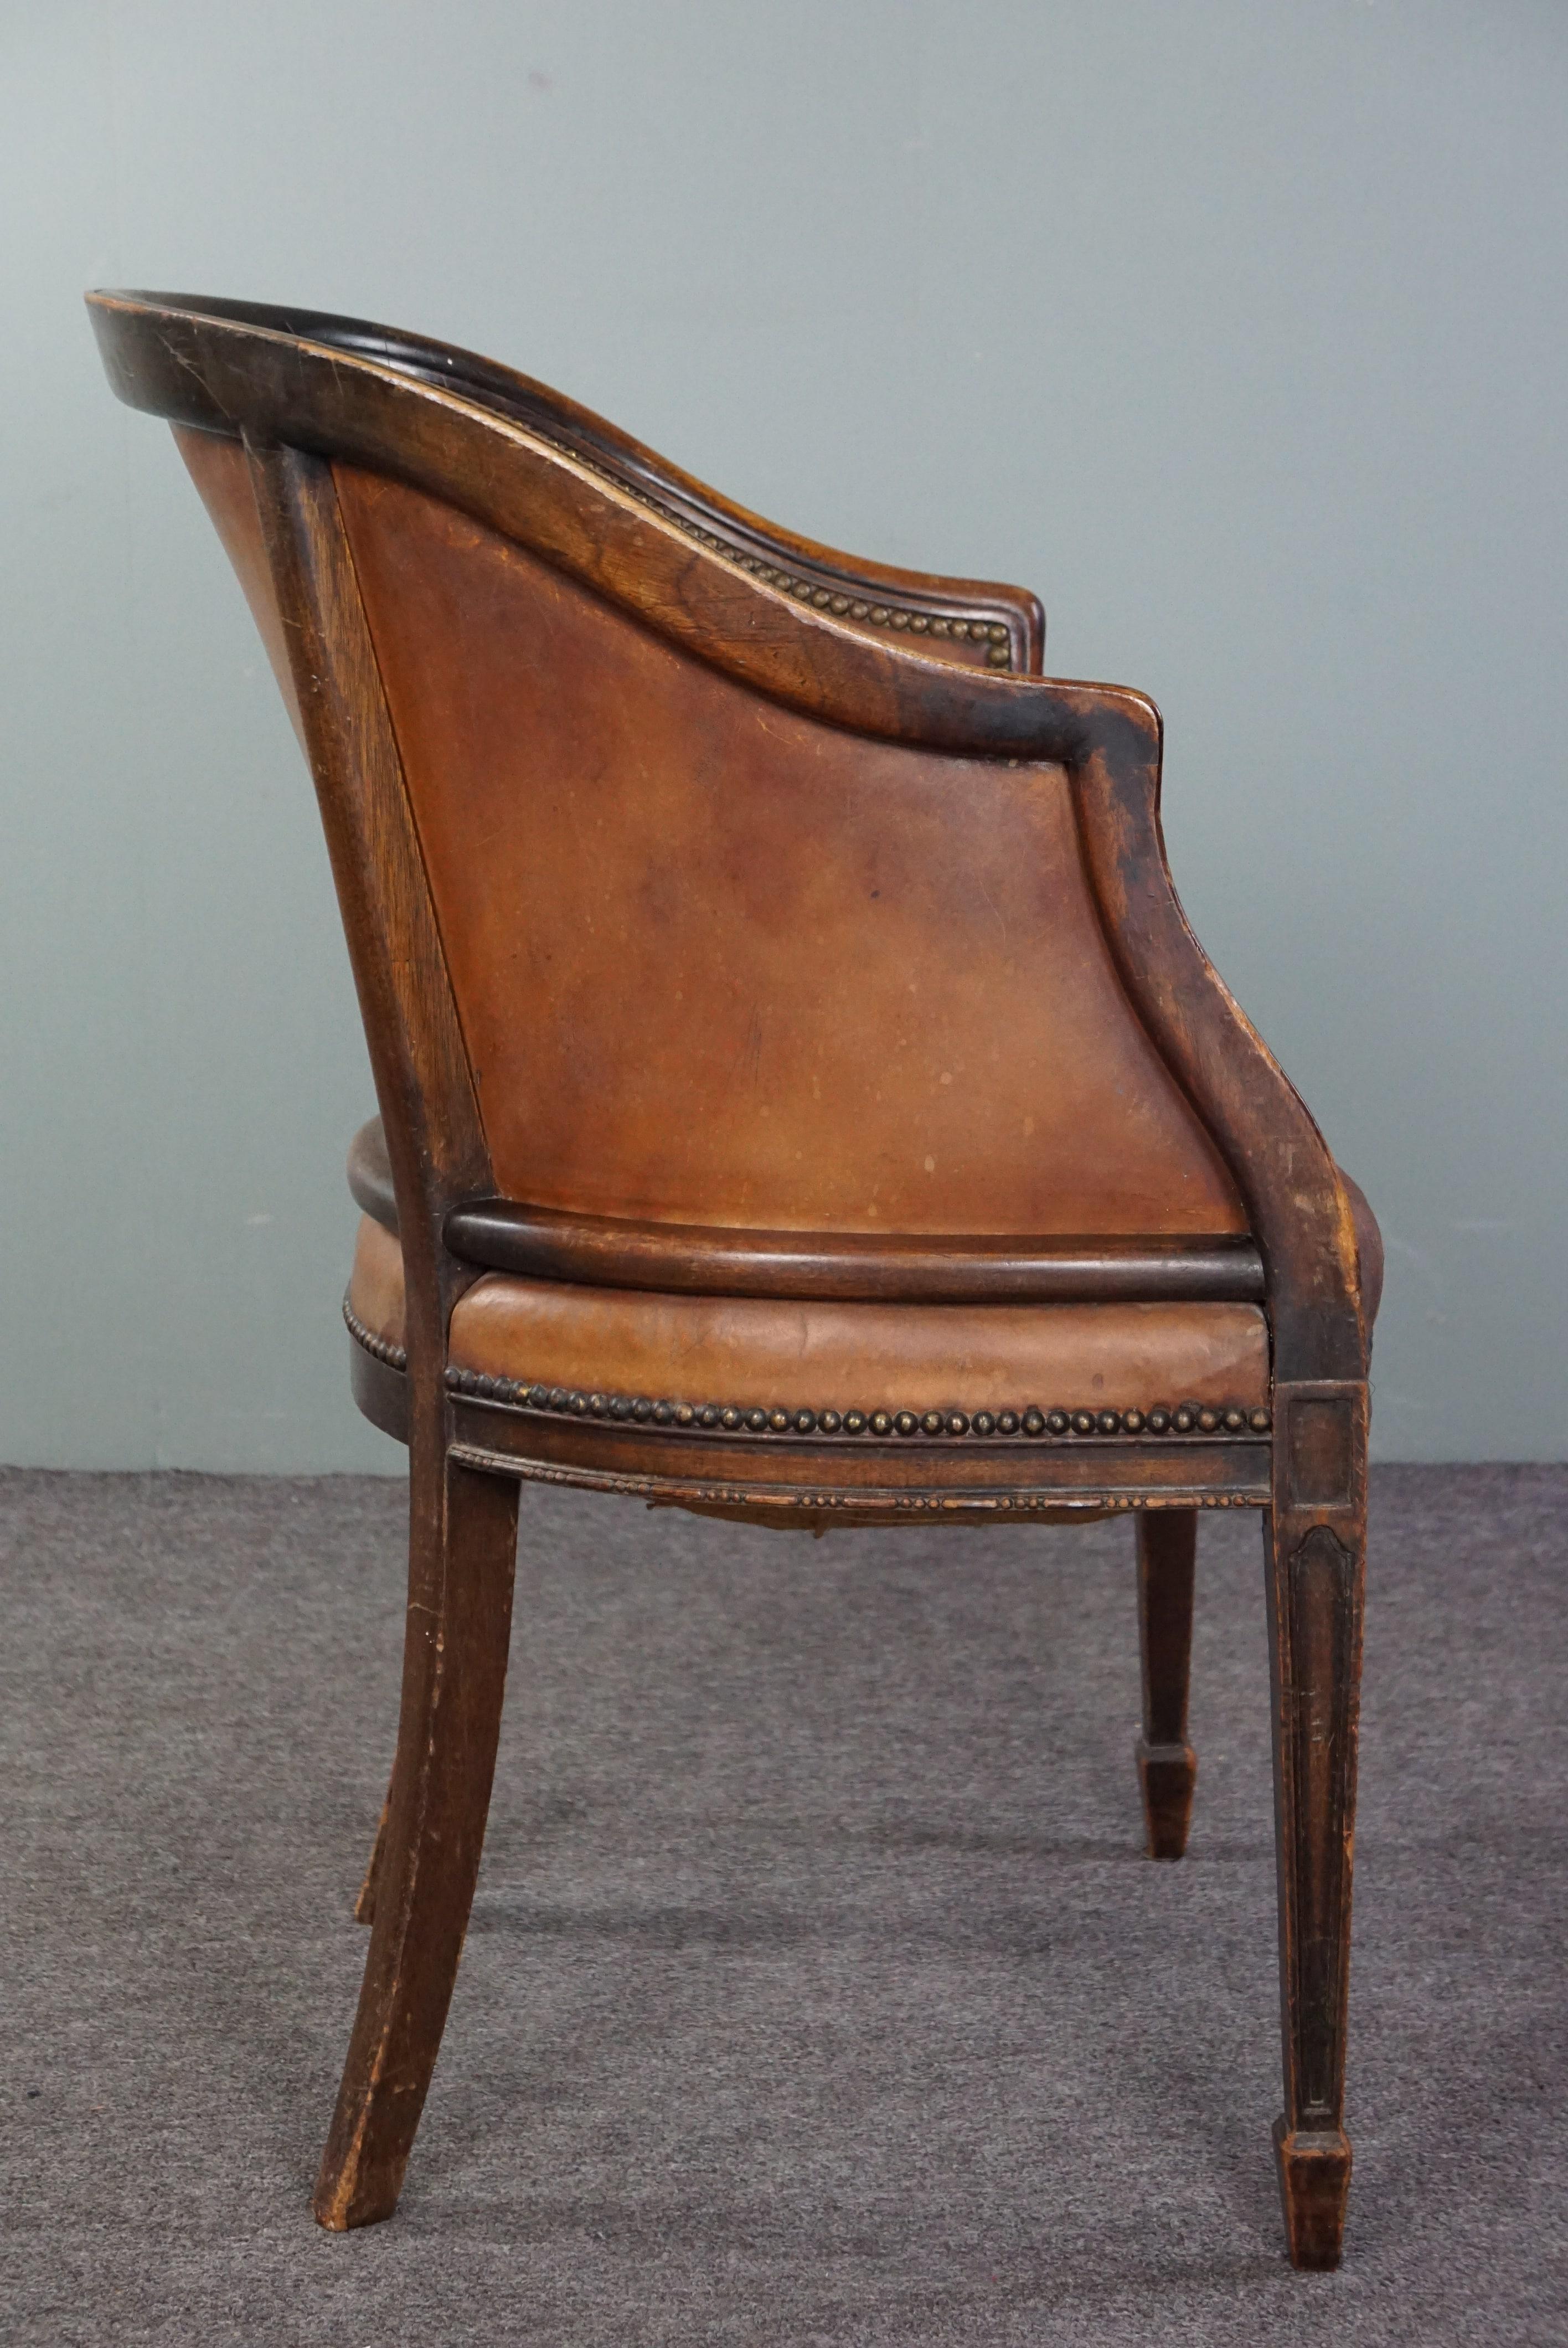 Early 20th Century Cognac-colored antique leather tub chair with beautiful patina For Sale